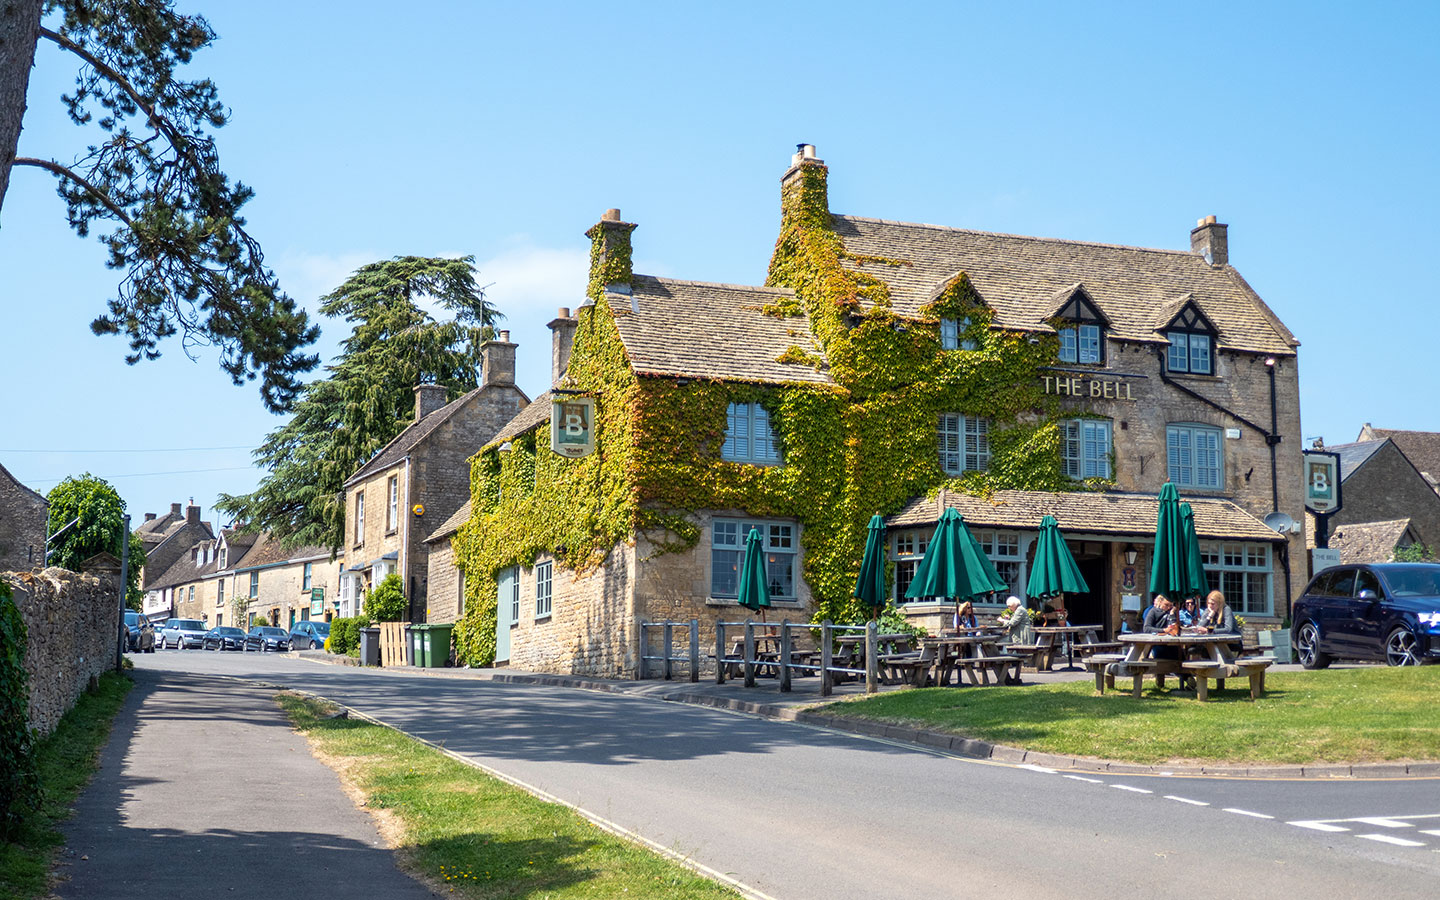 The Bell pub in Stow-on-the-Wold